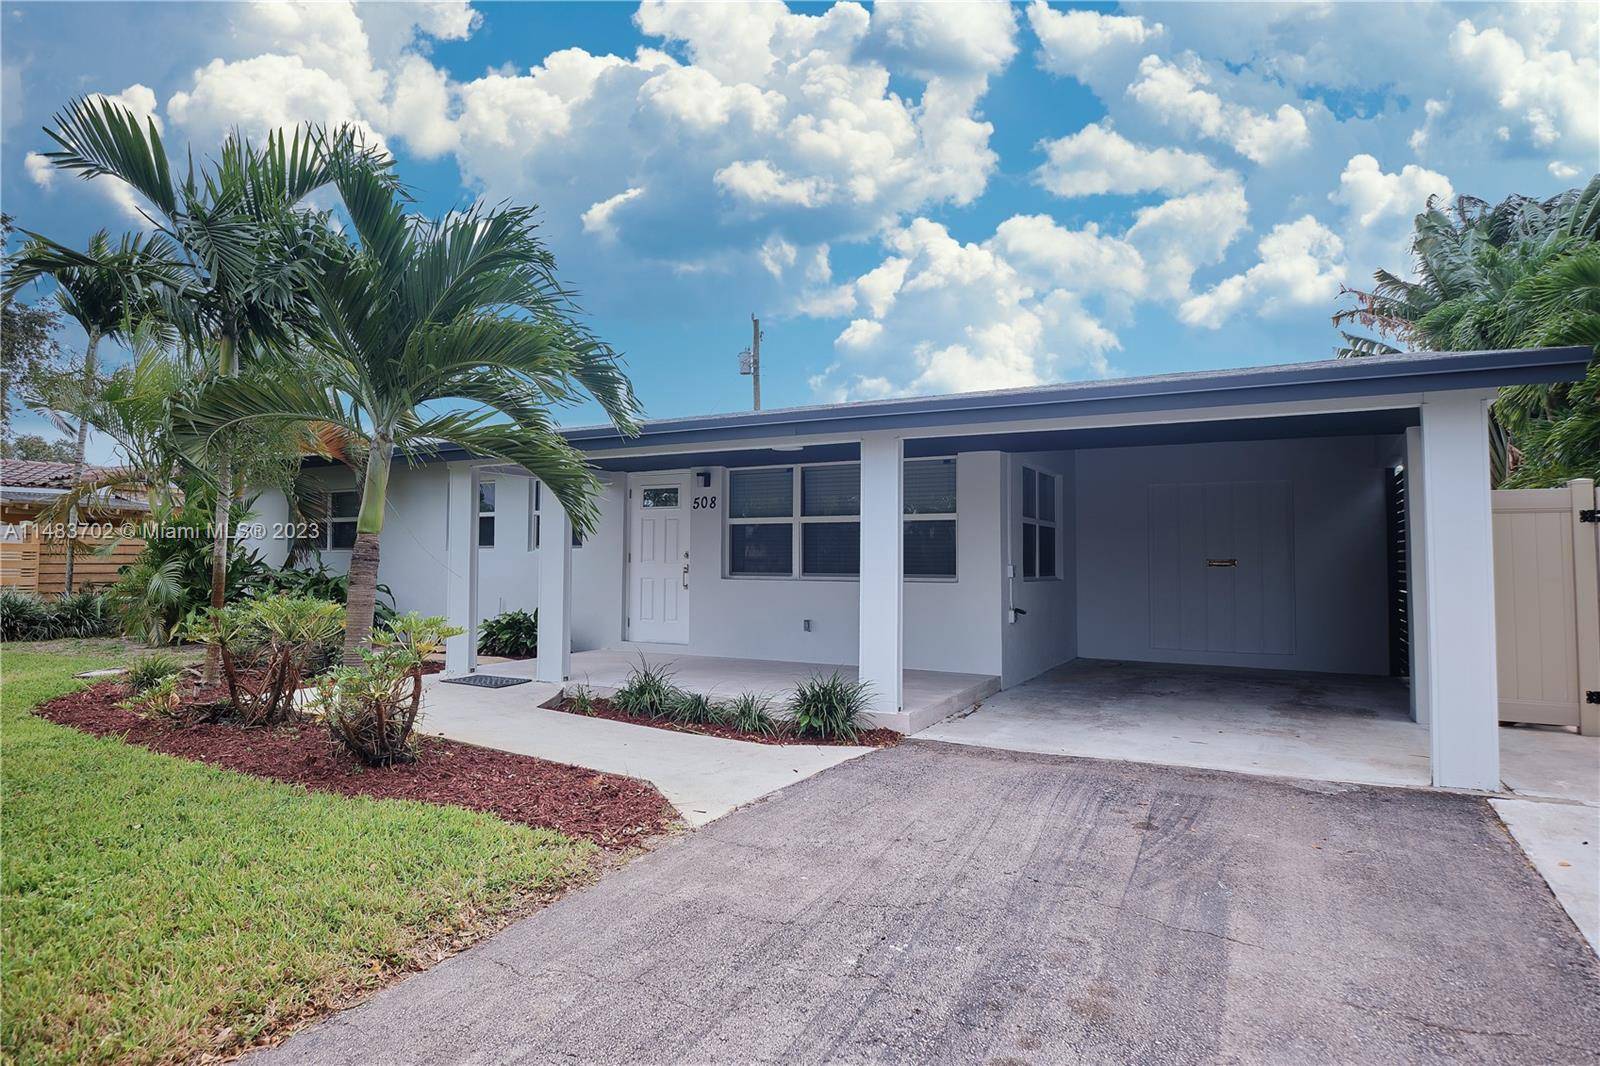 Newly renovated 3 bedroom, 2 bath home in Wilton Manors, where modern elegance meets comfort.